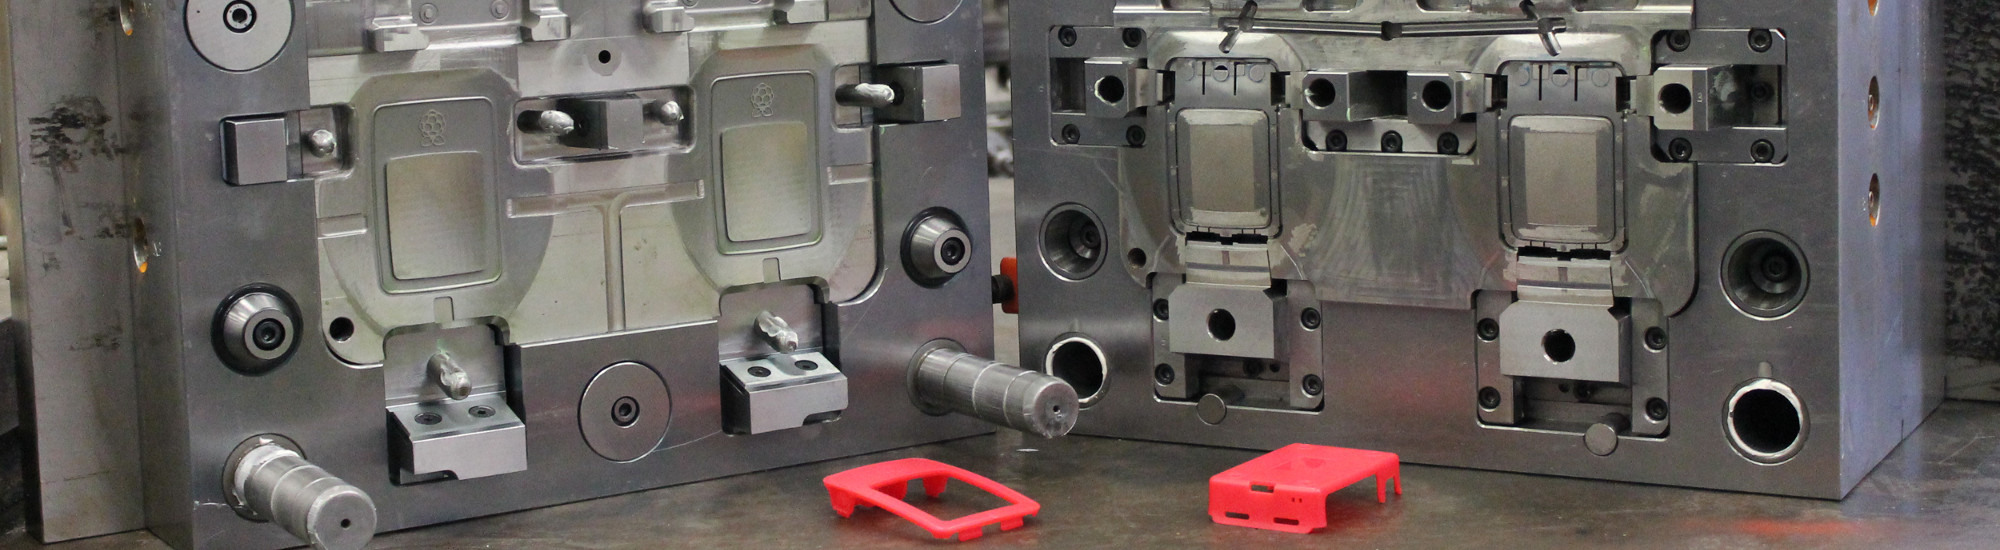 KPT UK Toolmakers - Injection Moulds & die casting tooling